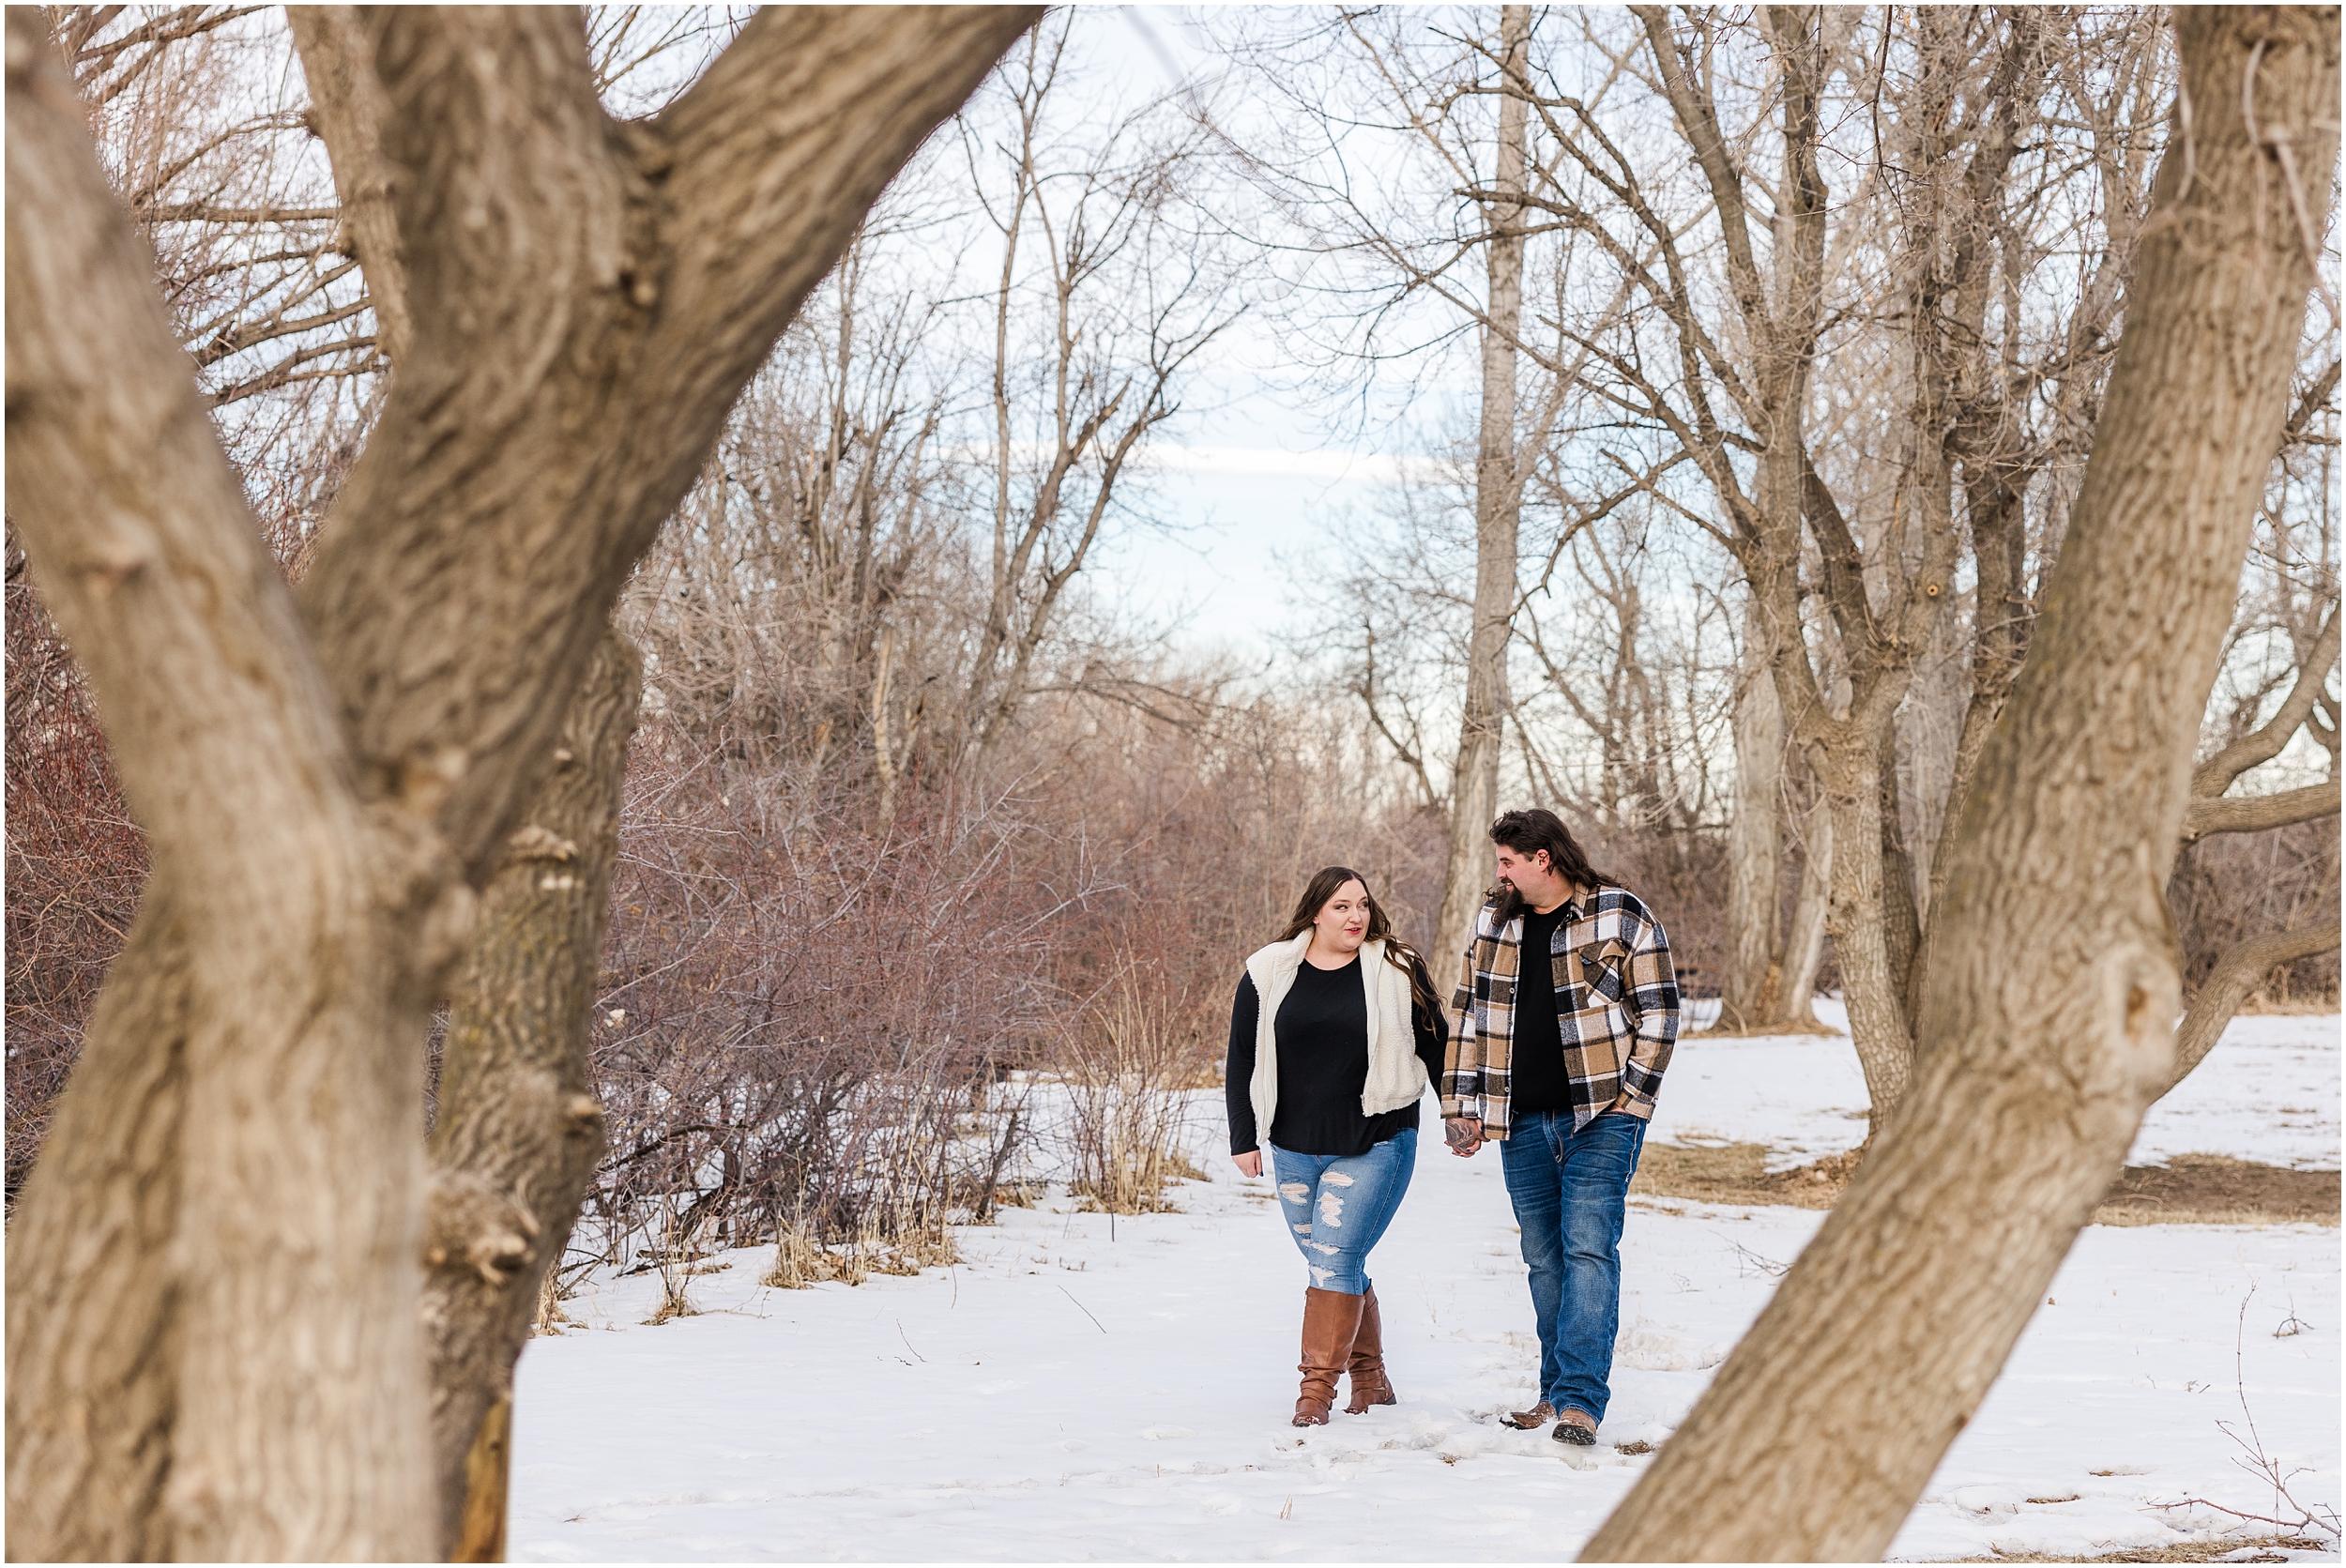 Wintery Engagement at South Mesa Trail Boulder Colorado with Ryley & Katelyn Brittani Chin Photography